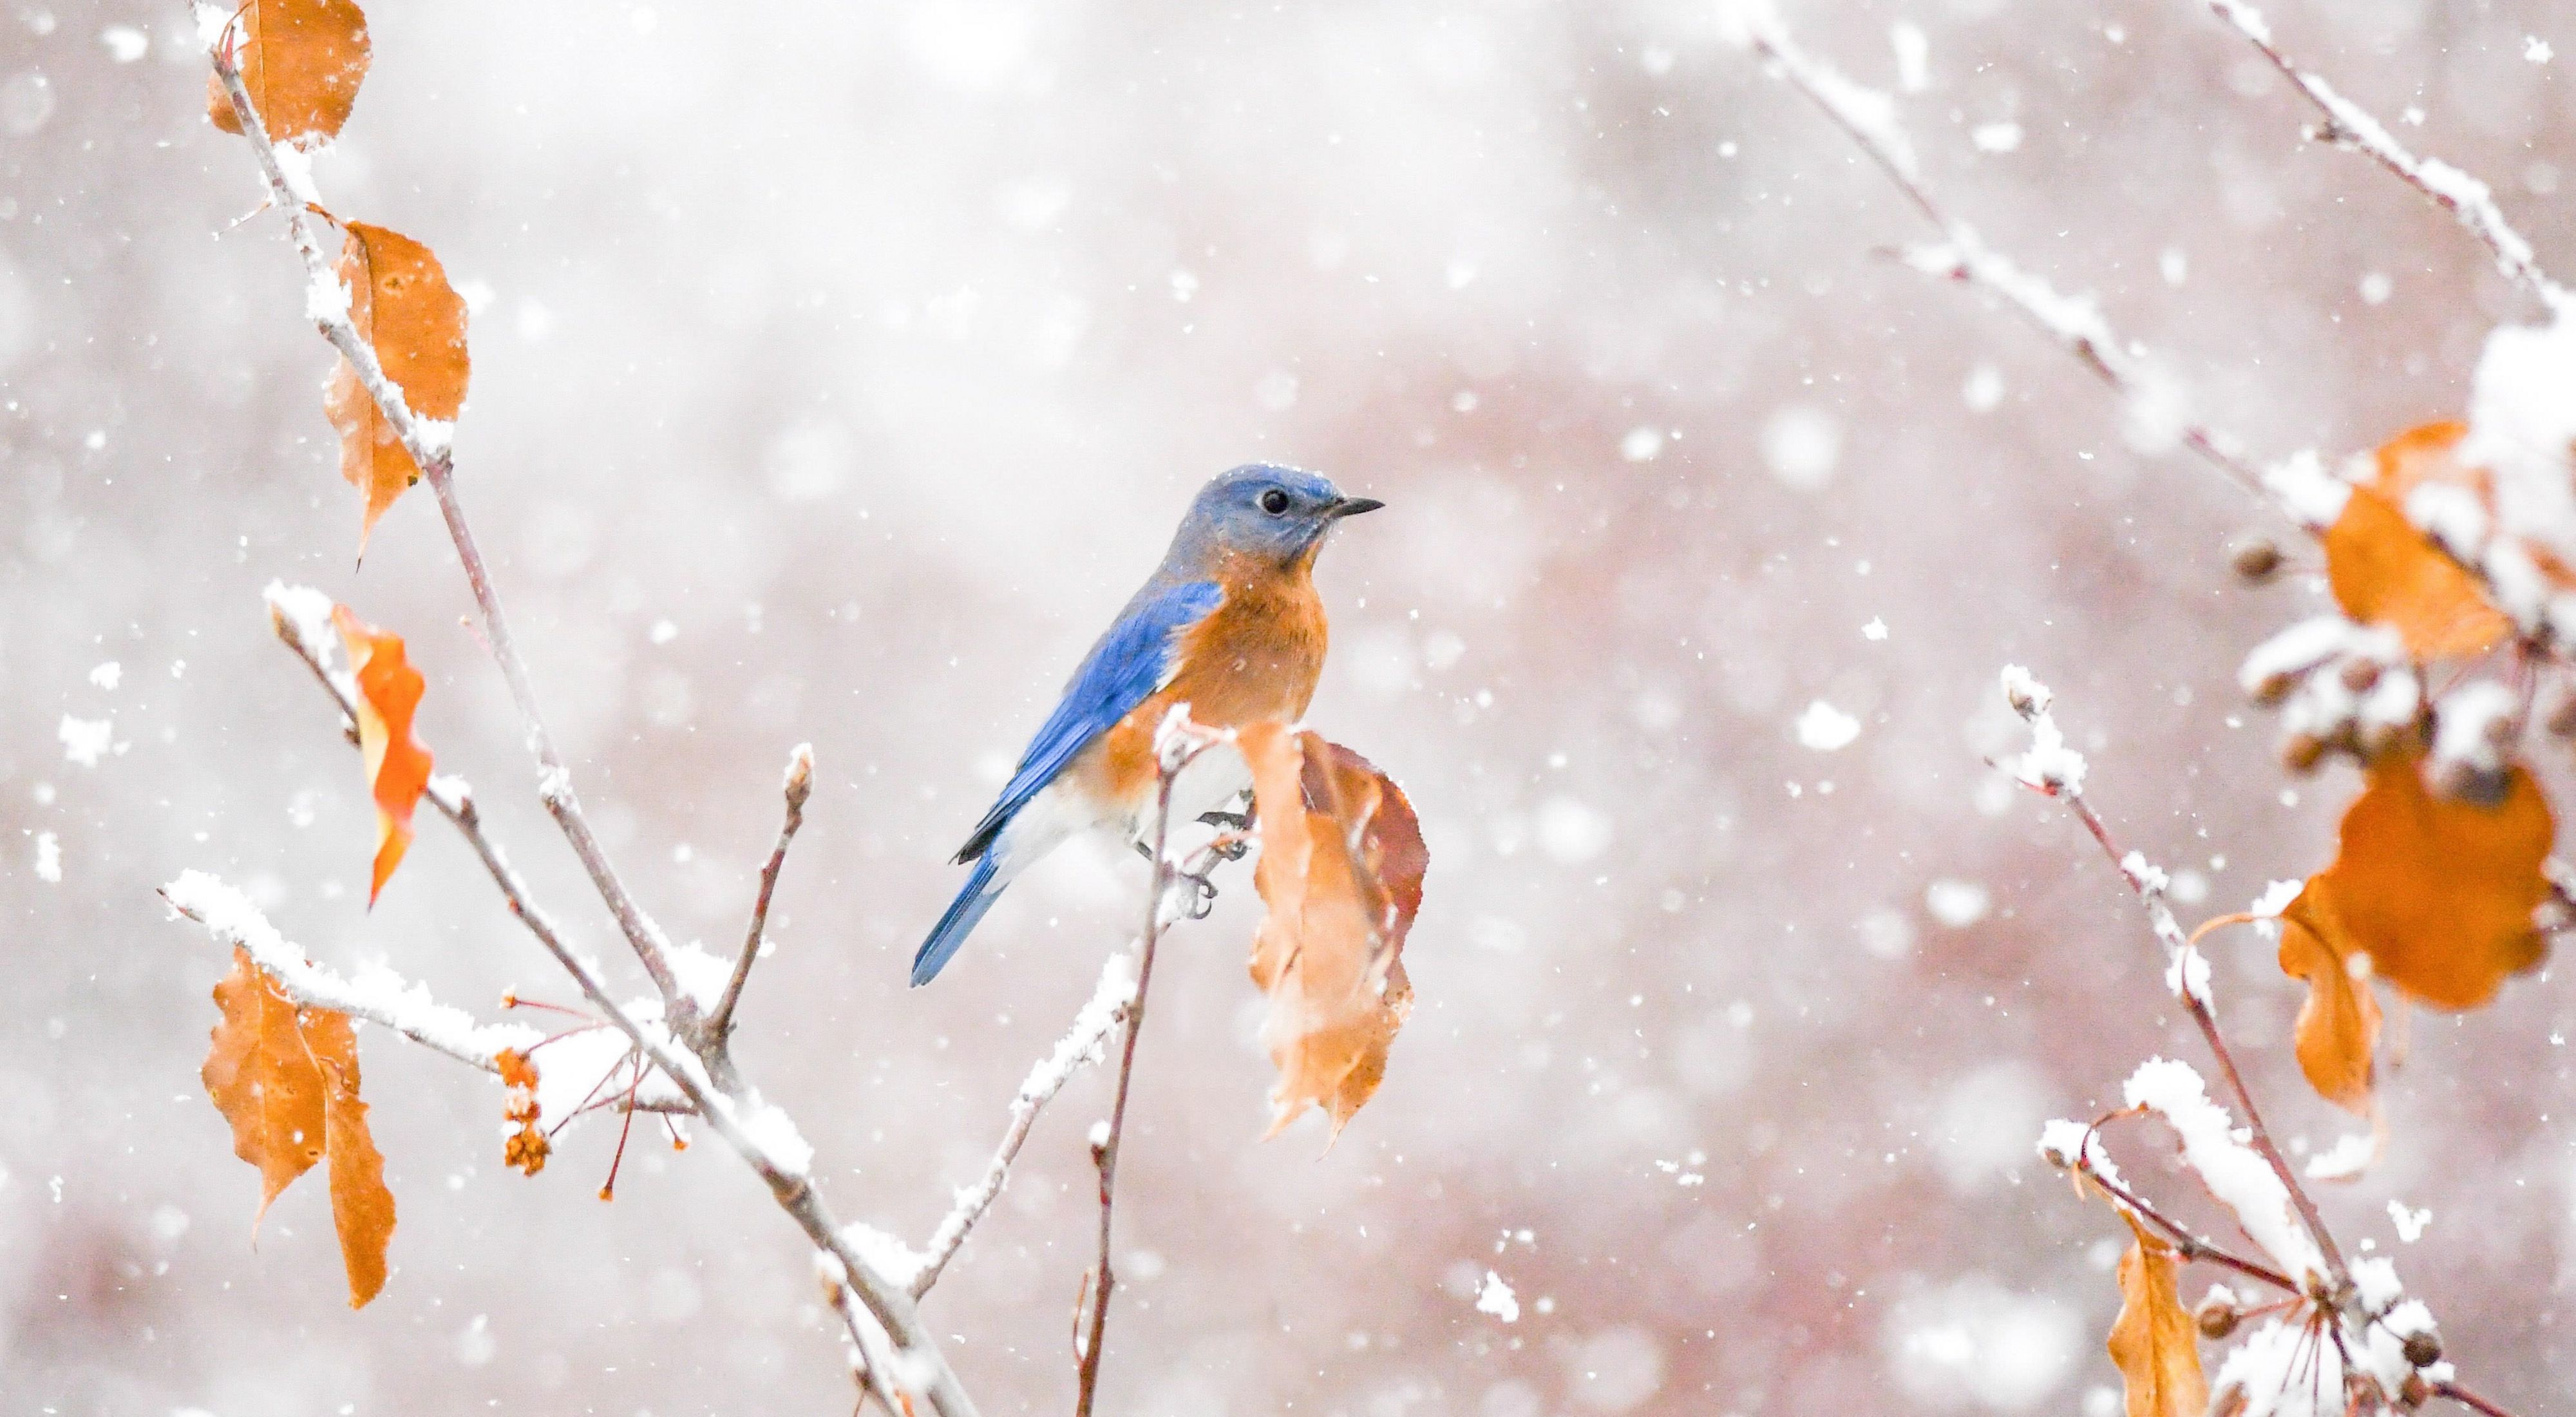 An eastern bluebird's rusty orange chest and last remaining leaves are bright pops of color in an early snowstorm.